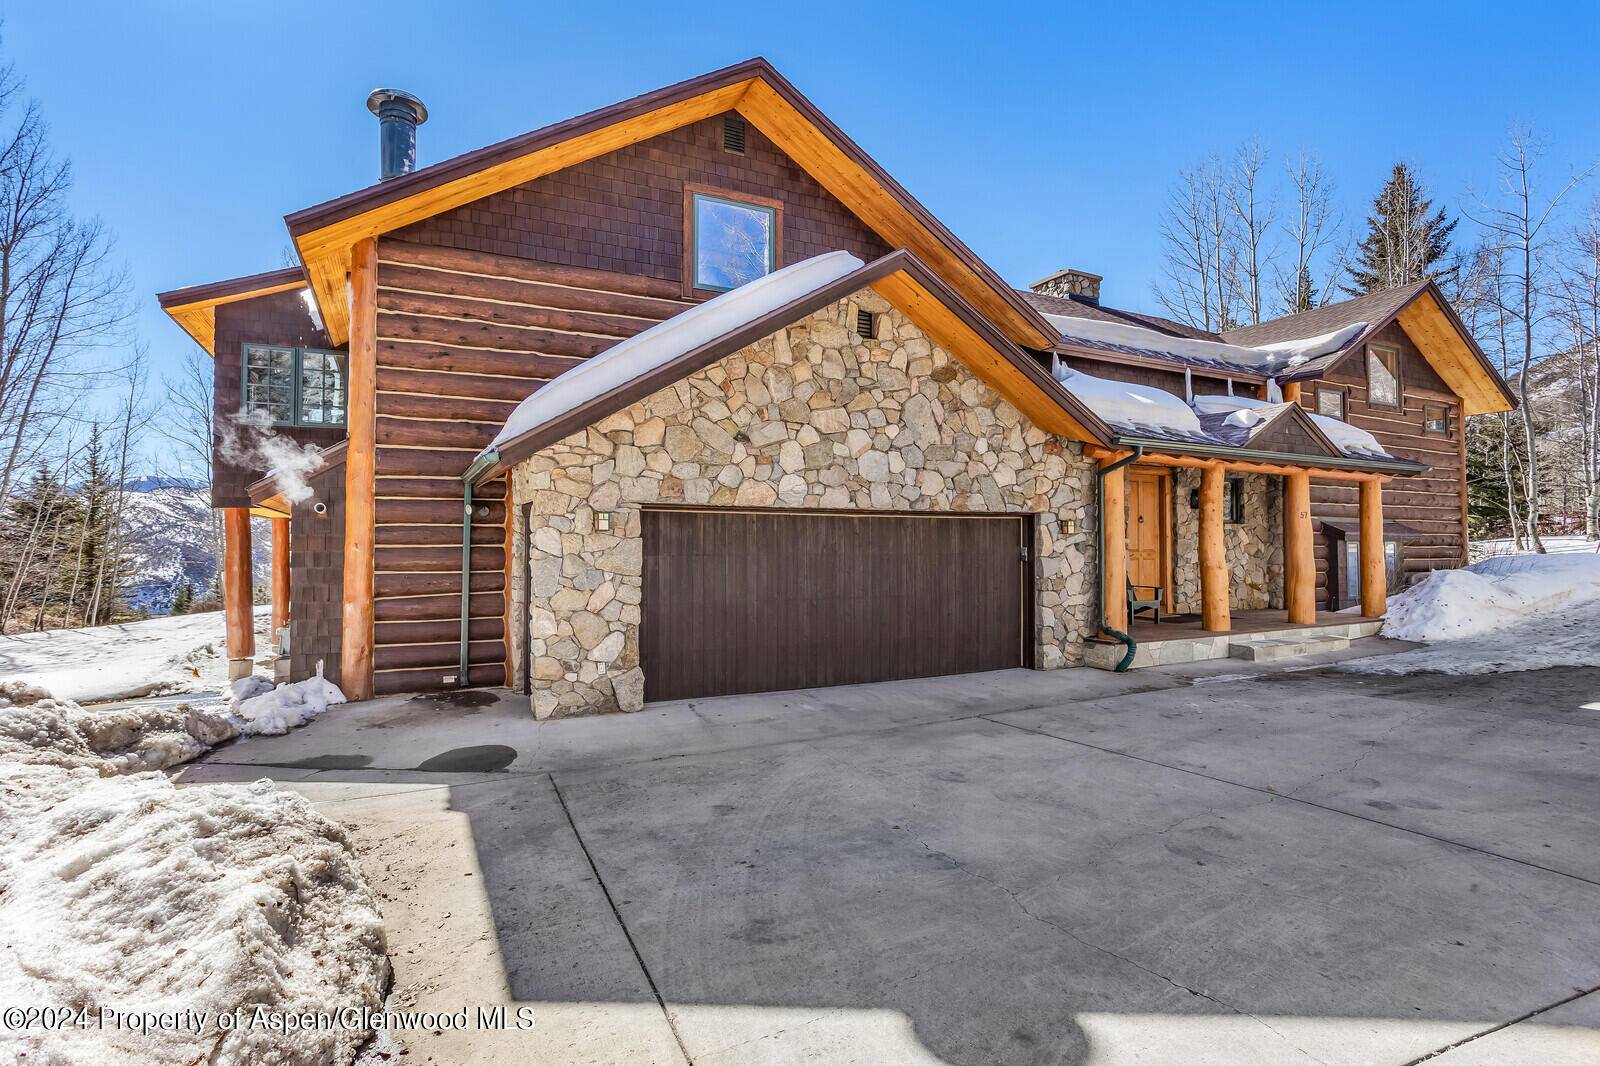 A perfect mountain lodge family home located in the Horse Ranch neighborhood with great views, and an open floor plan with ample entertaining living spaces.